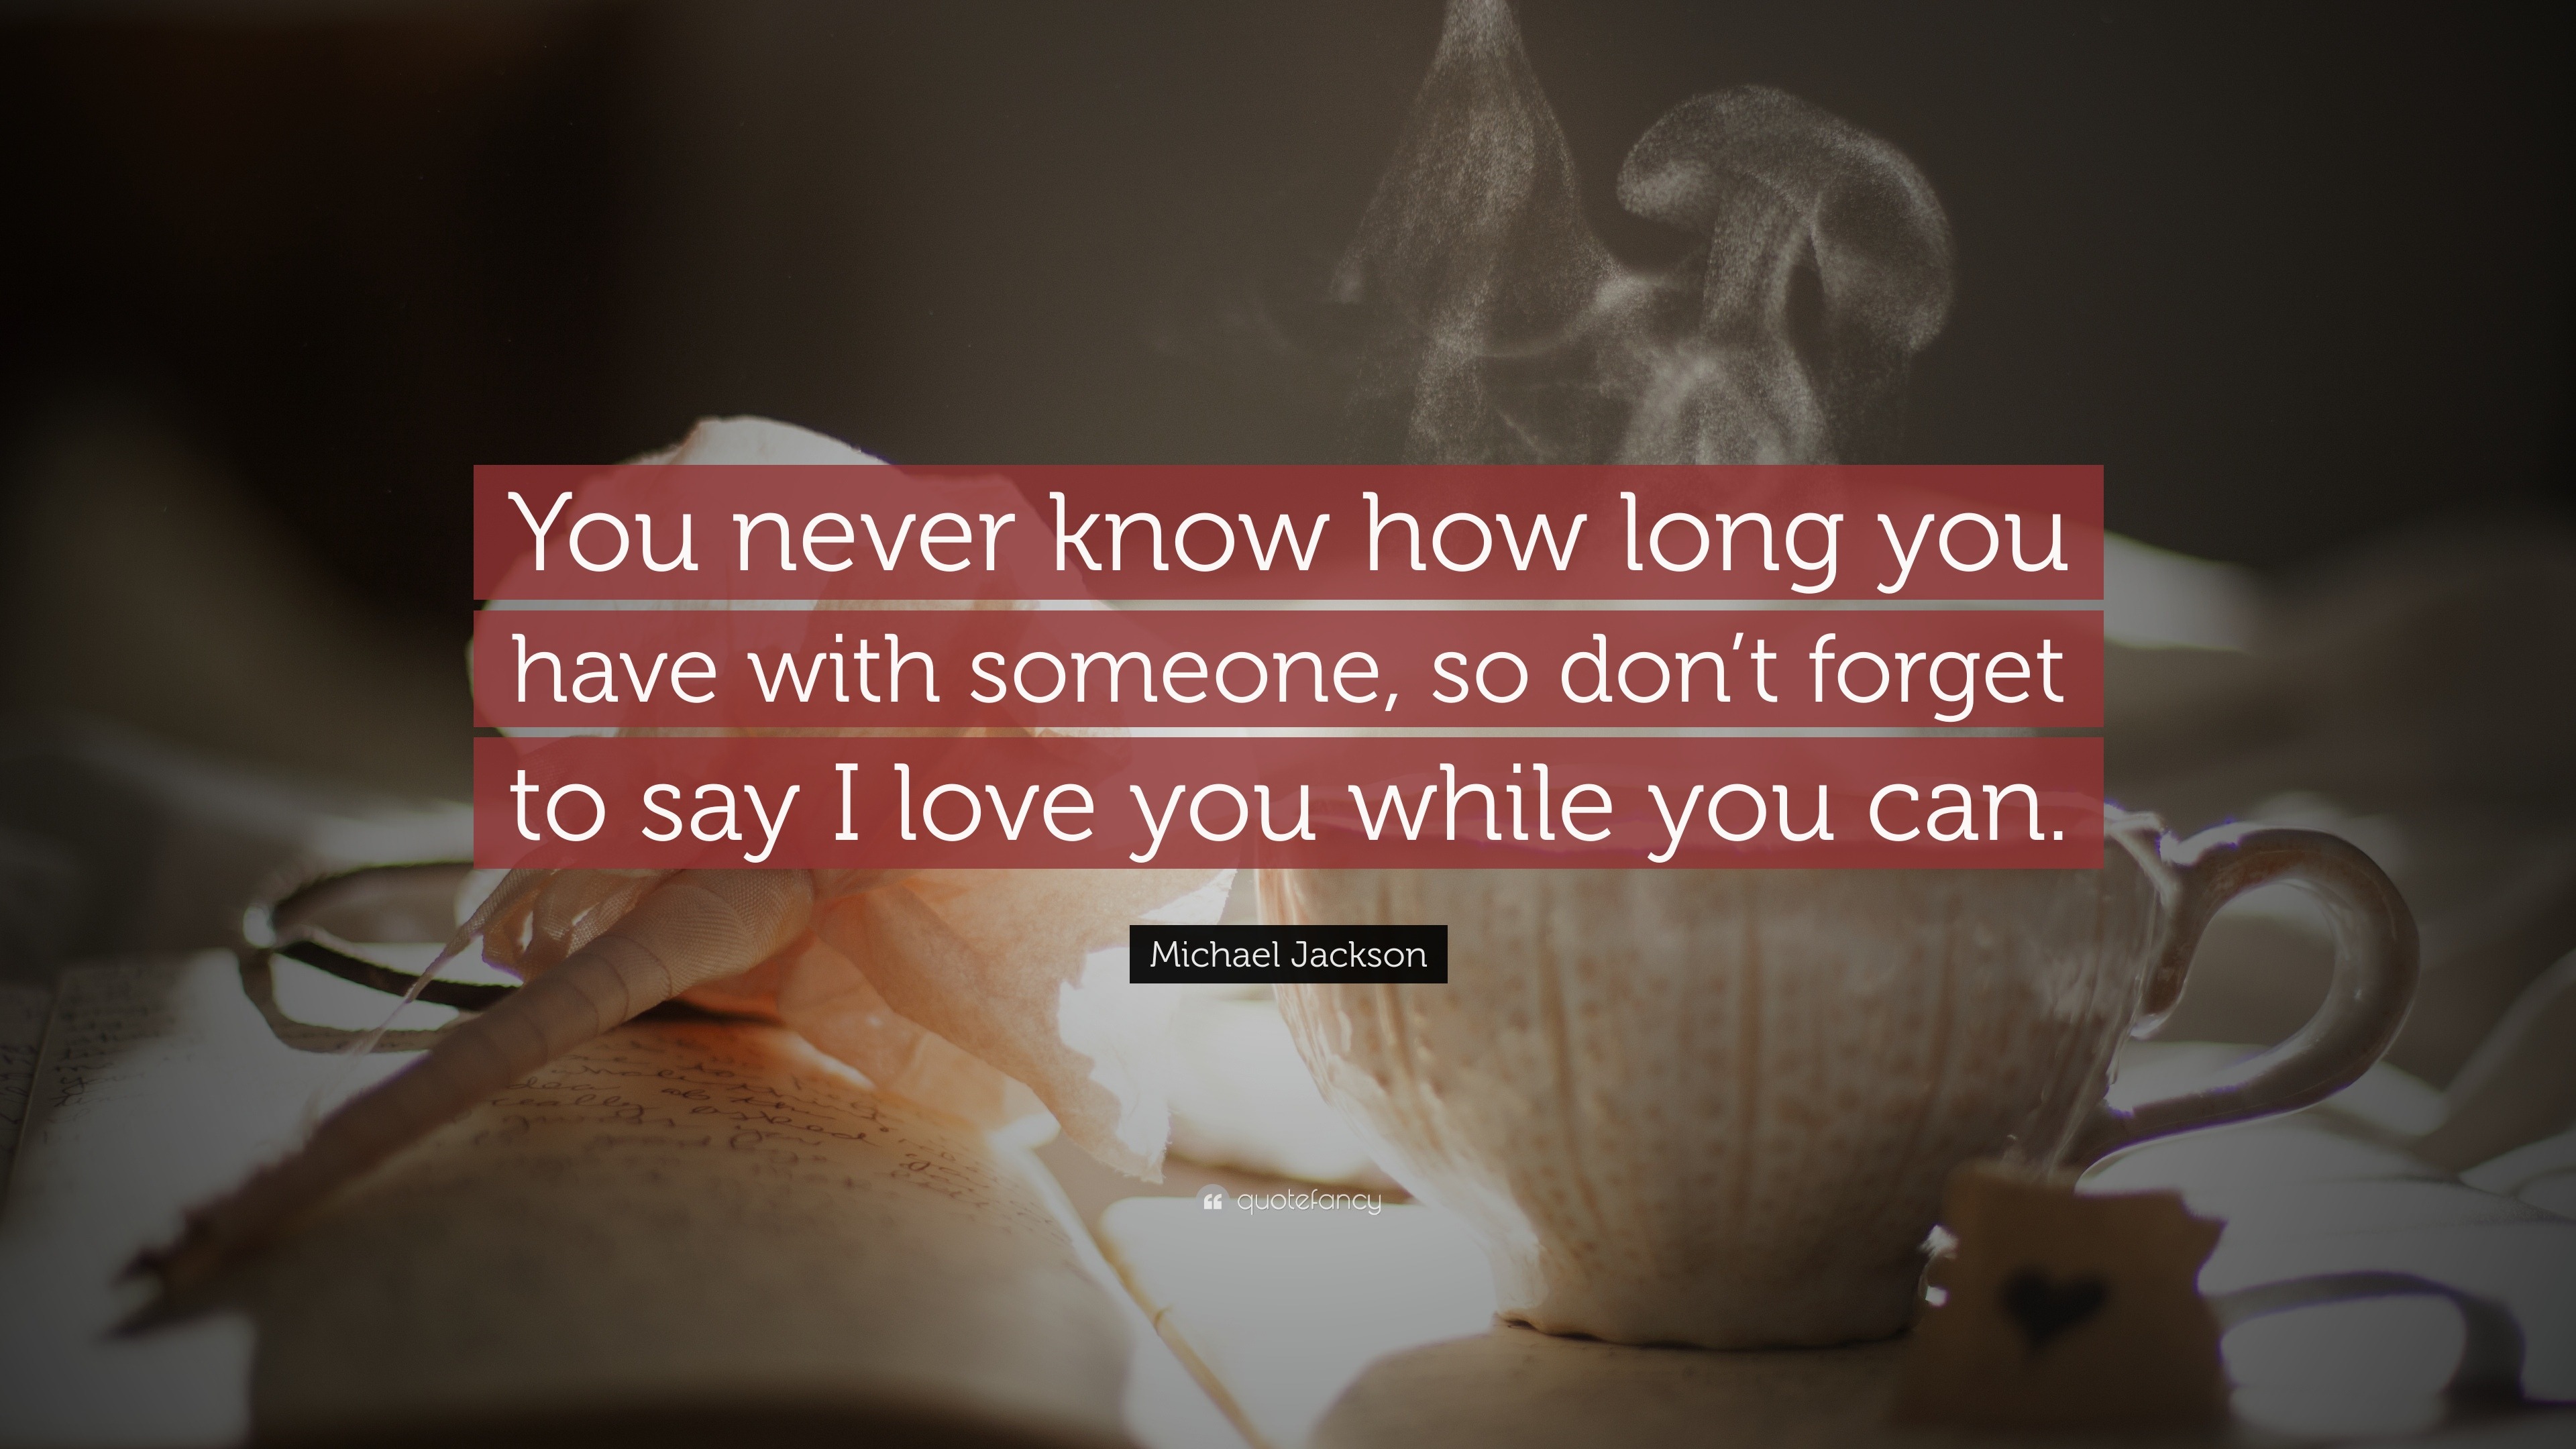 Michael Jackson Quote: "You never know how long you have with someone, so don't forget to say I ...